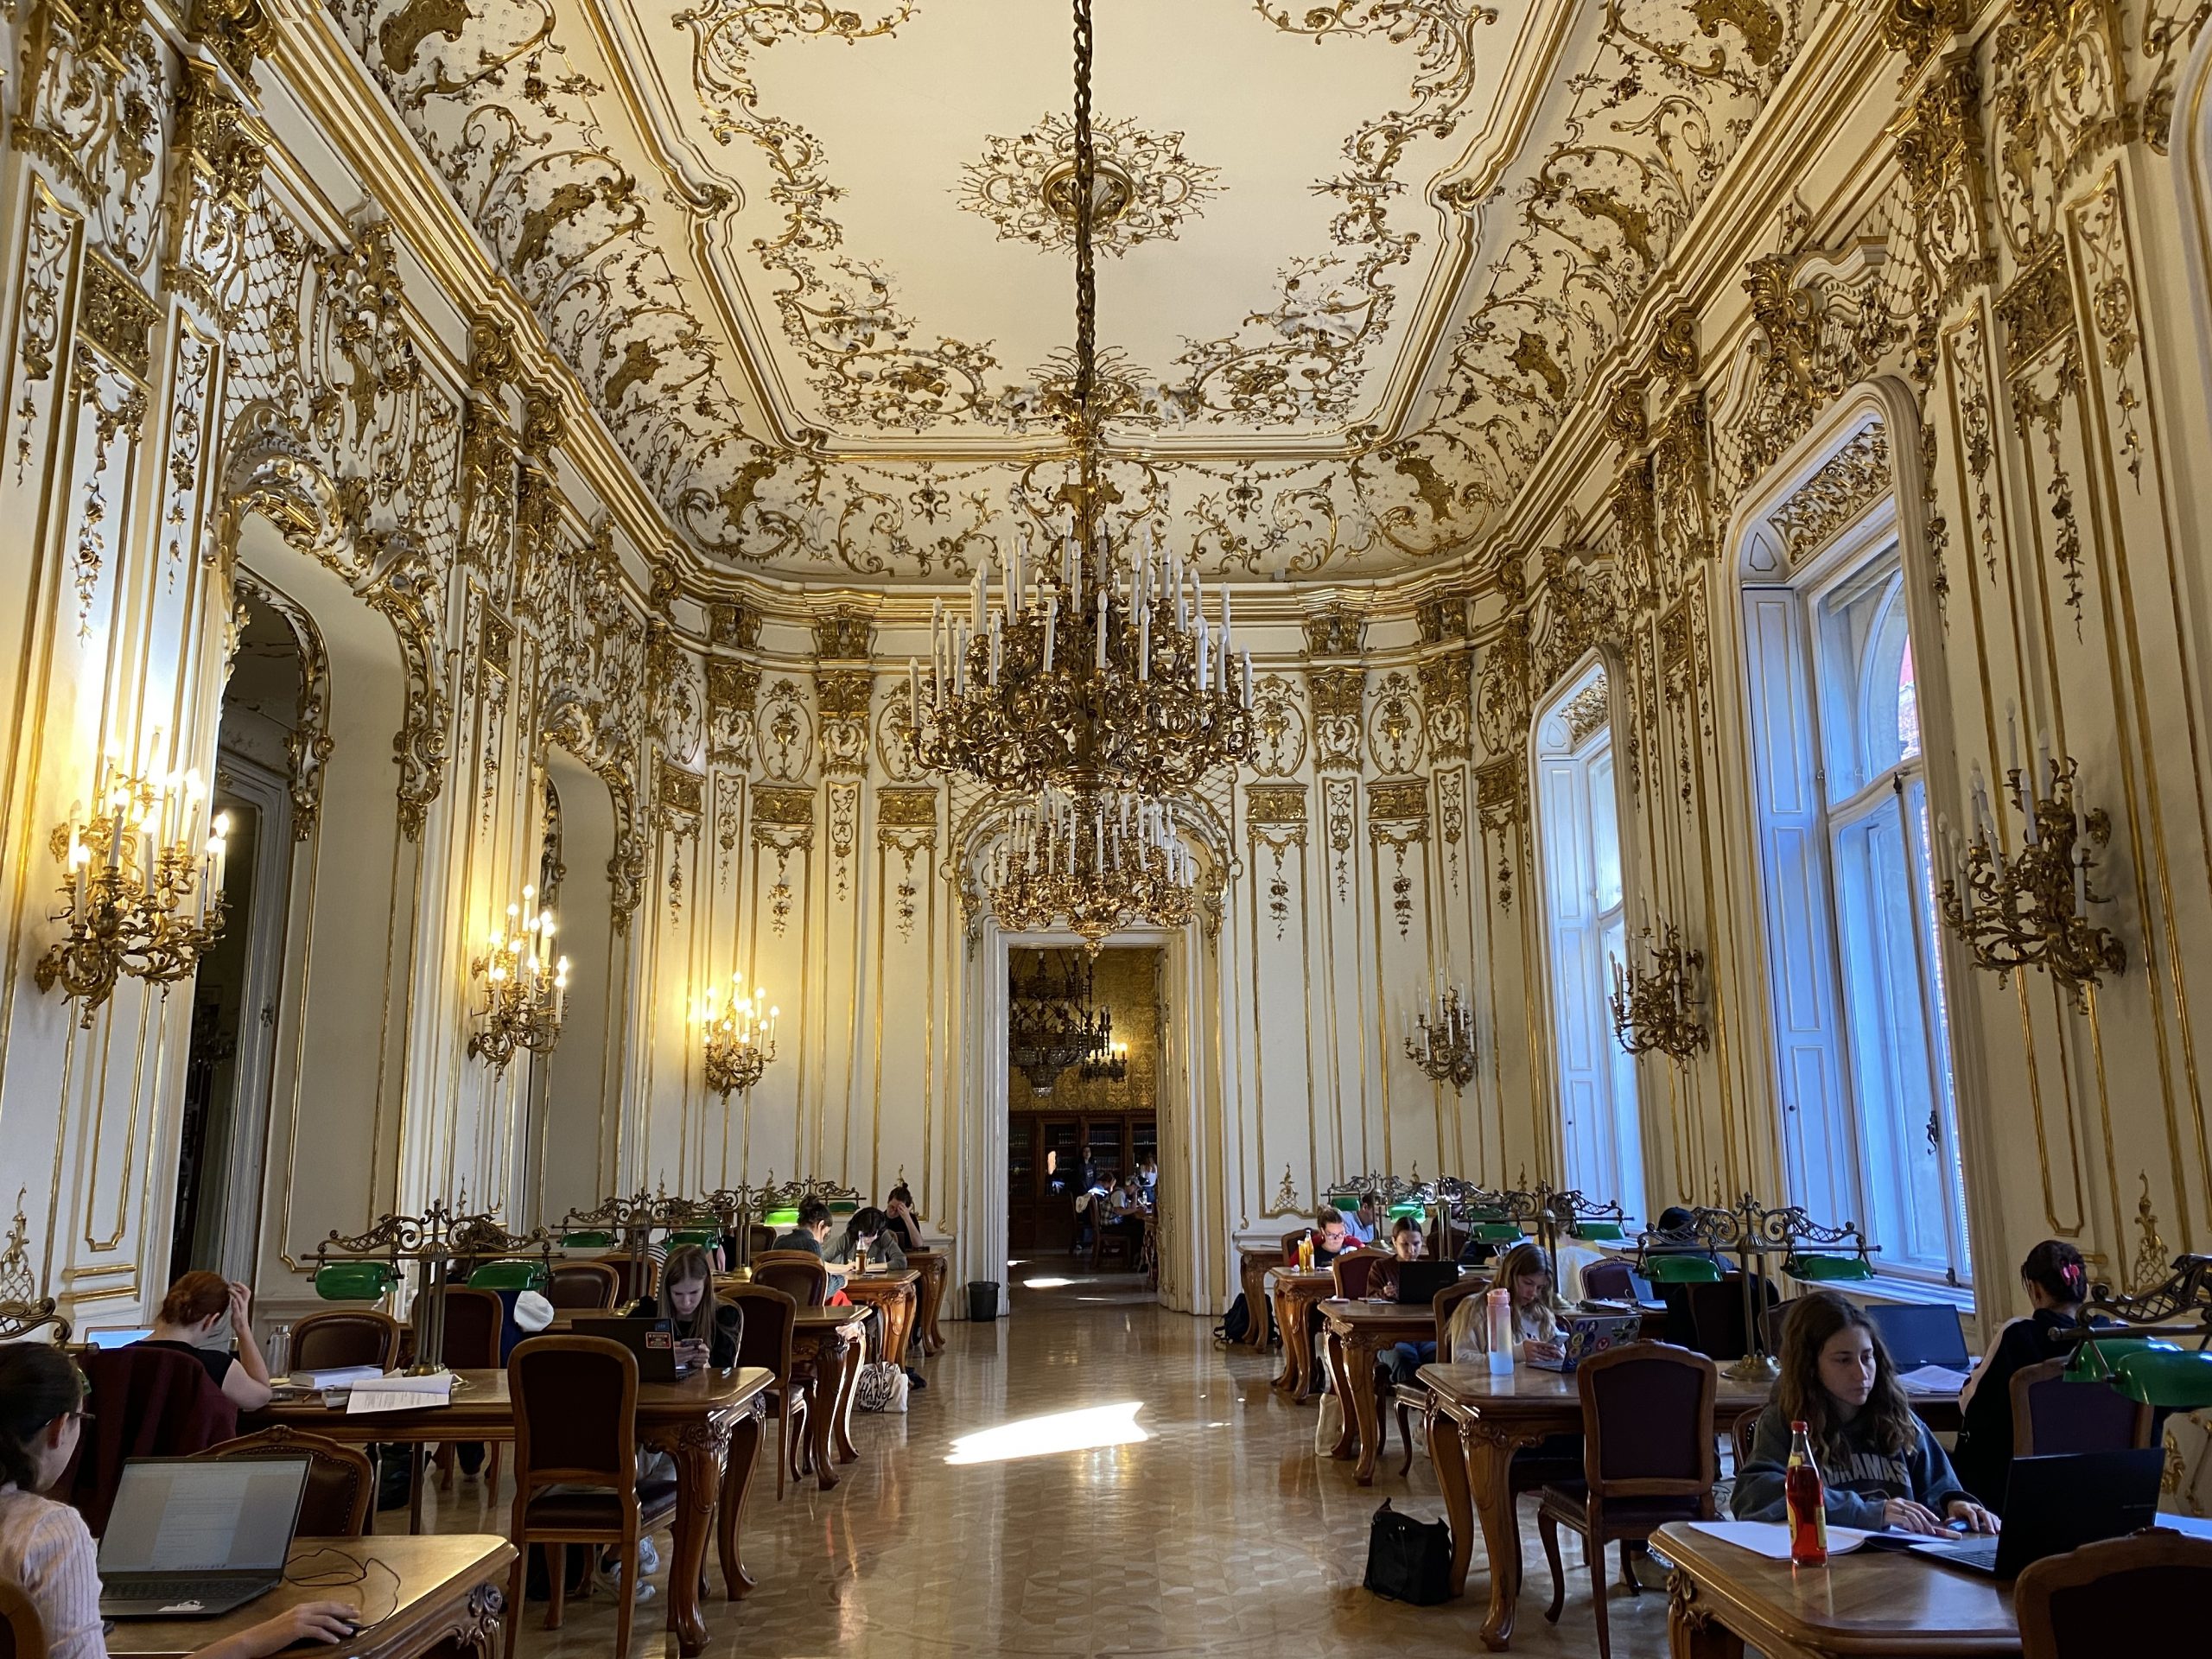 A ballroom with golden gilded walls and a golden chandelier filled with students studying at wooden tables